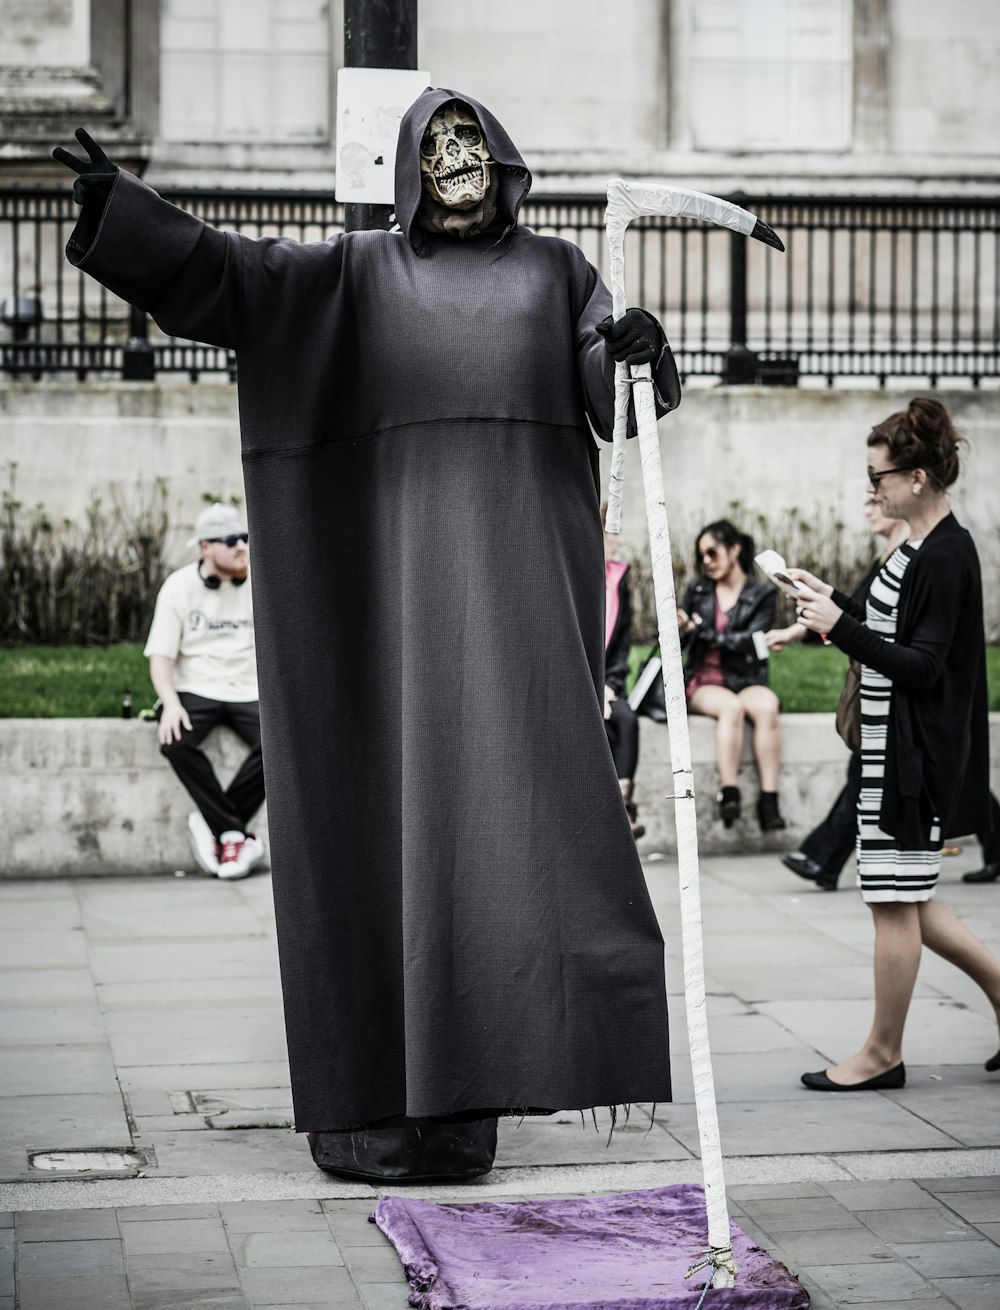 man in grim reaper costume with scythe near woman walking and people sitting on ledge